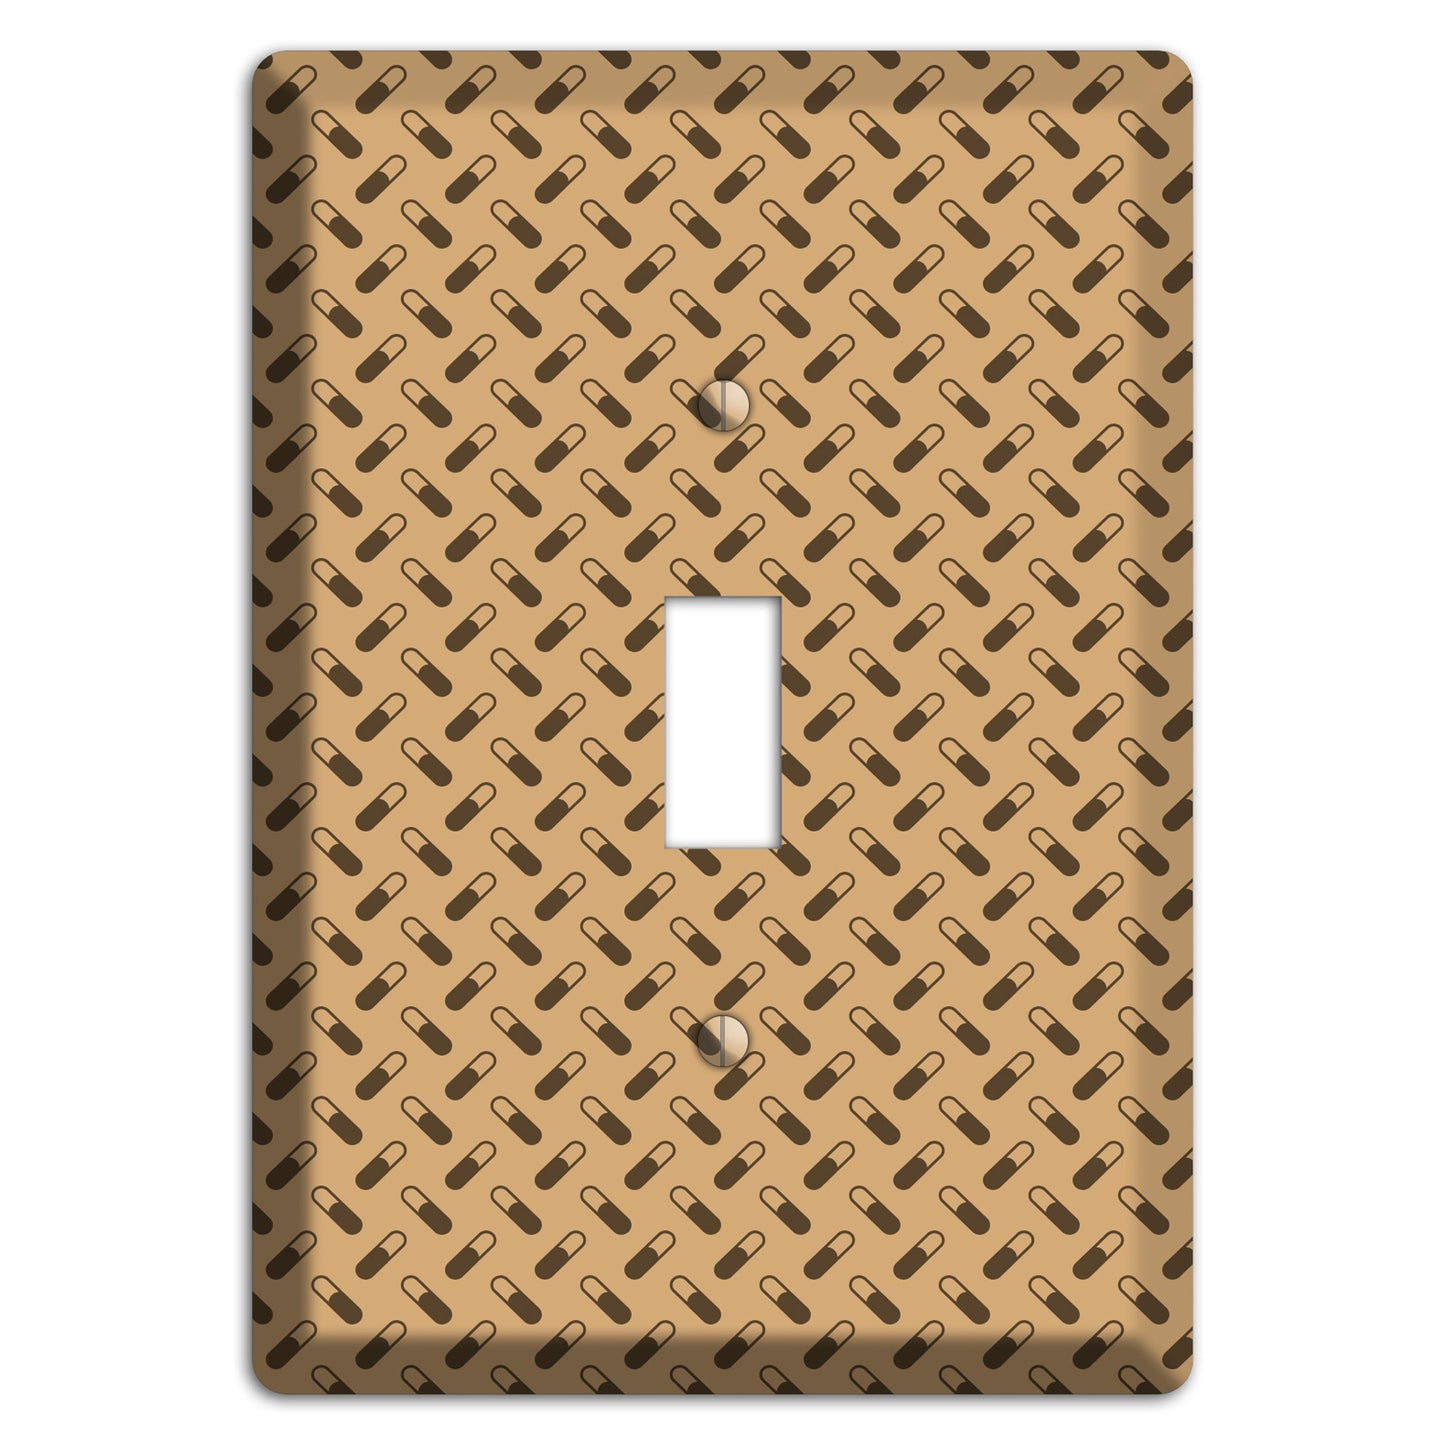 Beige with Brown Motif Cover Plates